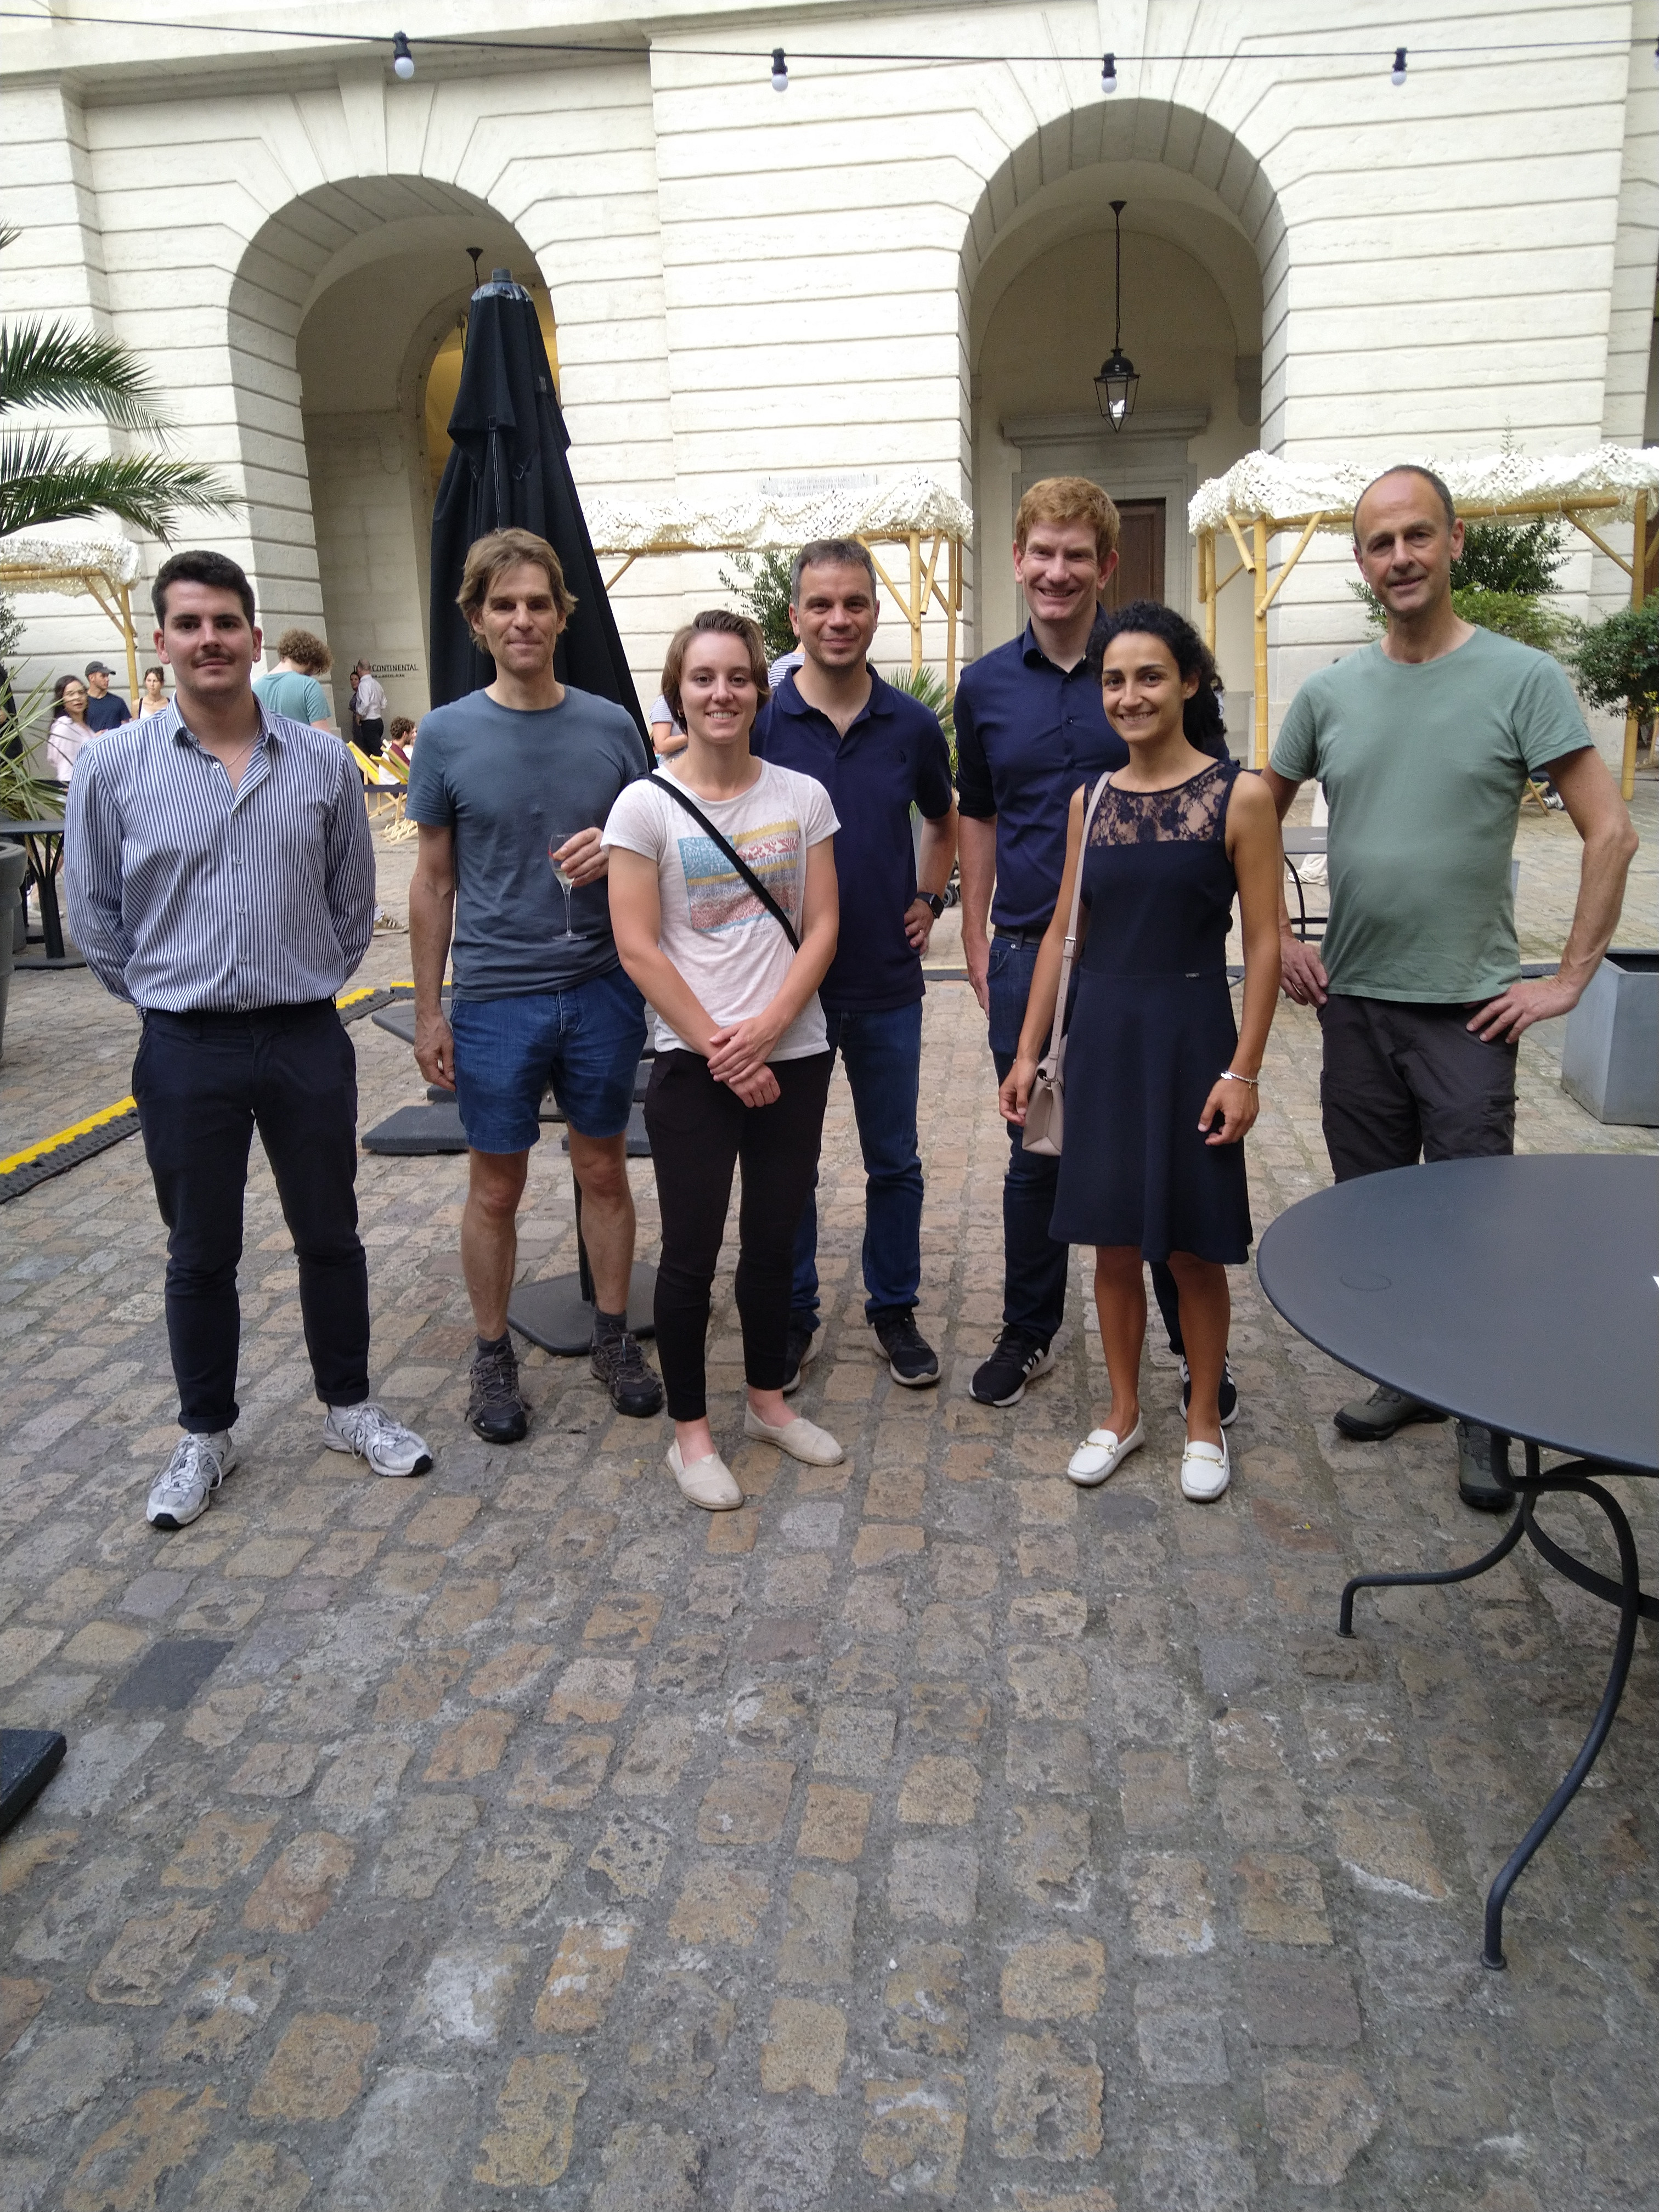 photo of 7 MICROCARD members at the 2023 FIMH meeting in
	 Lyon. From left to right: Joshua Steyer, Yves Coudière, Lia Gander,
	 Simone Pezzuto, Axel Loewe, Sofia Botti, Mark Potse.